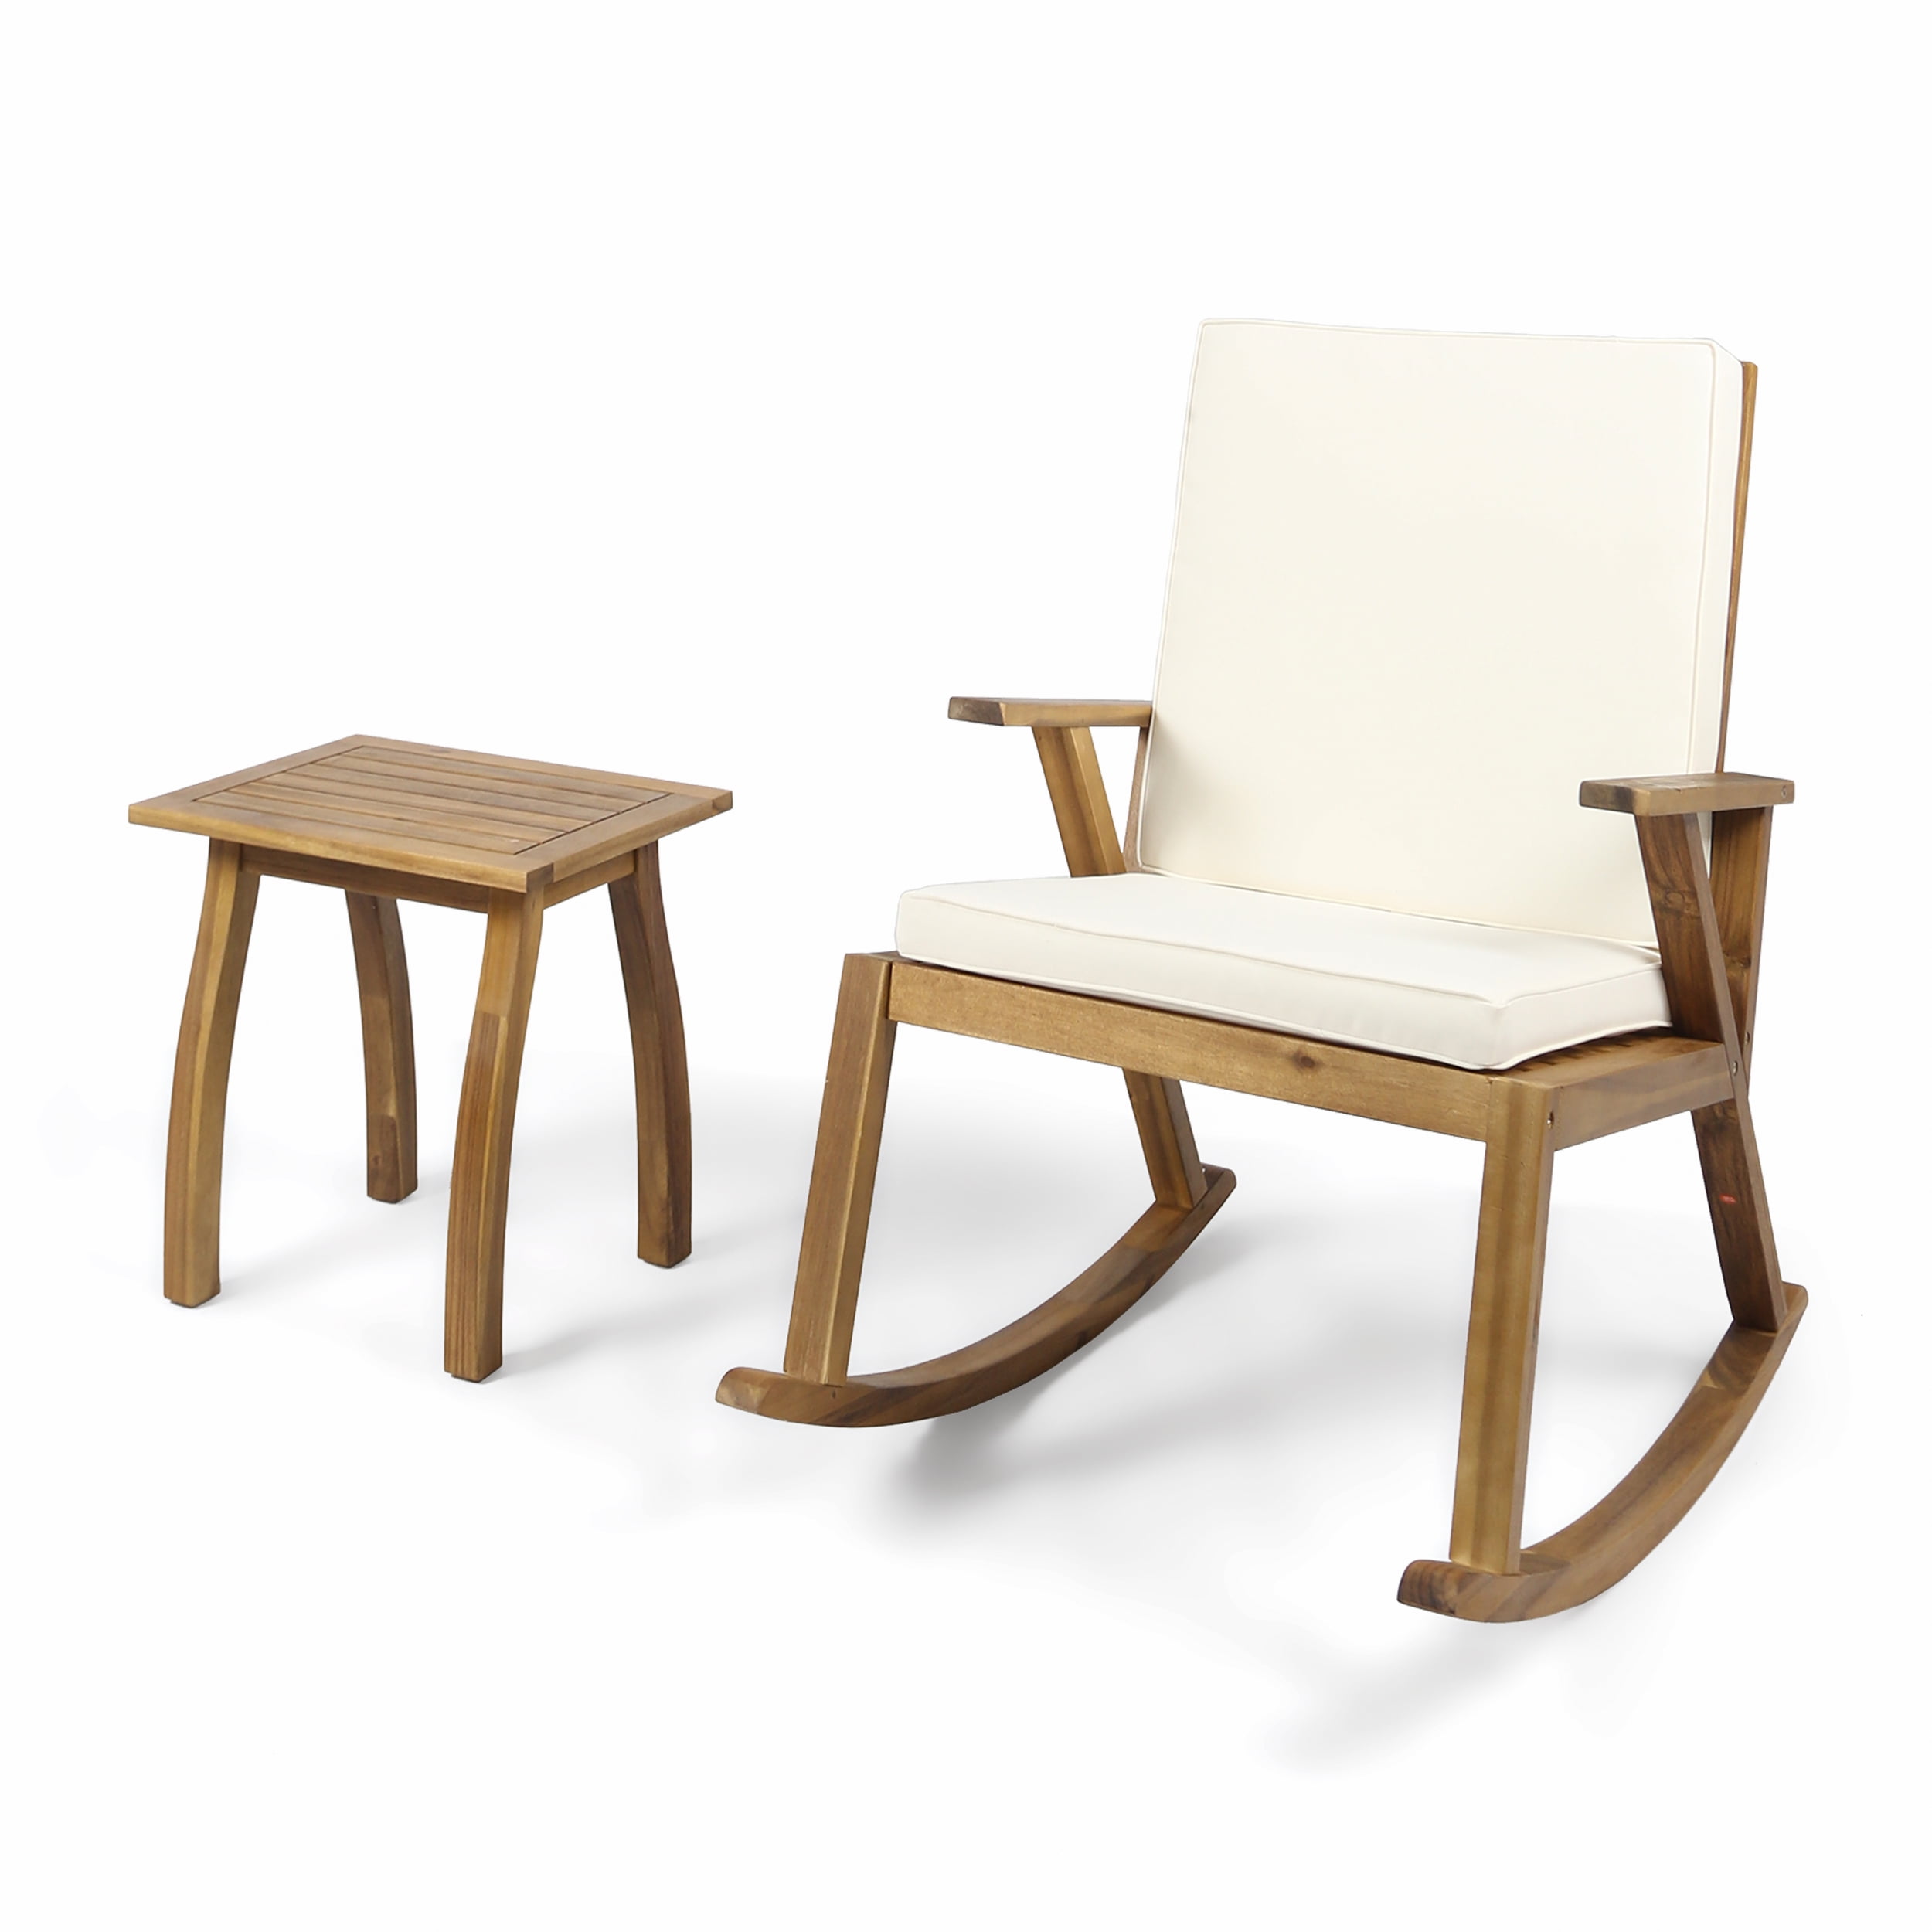 Alize Outdoor Acacia Wood Rocking Chair and Side Table, Teak and Cream - image 1 of 7